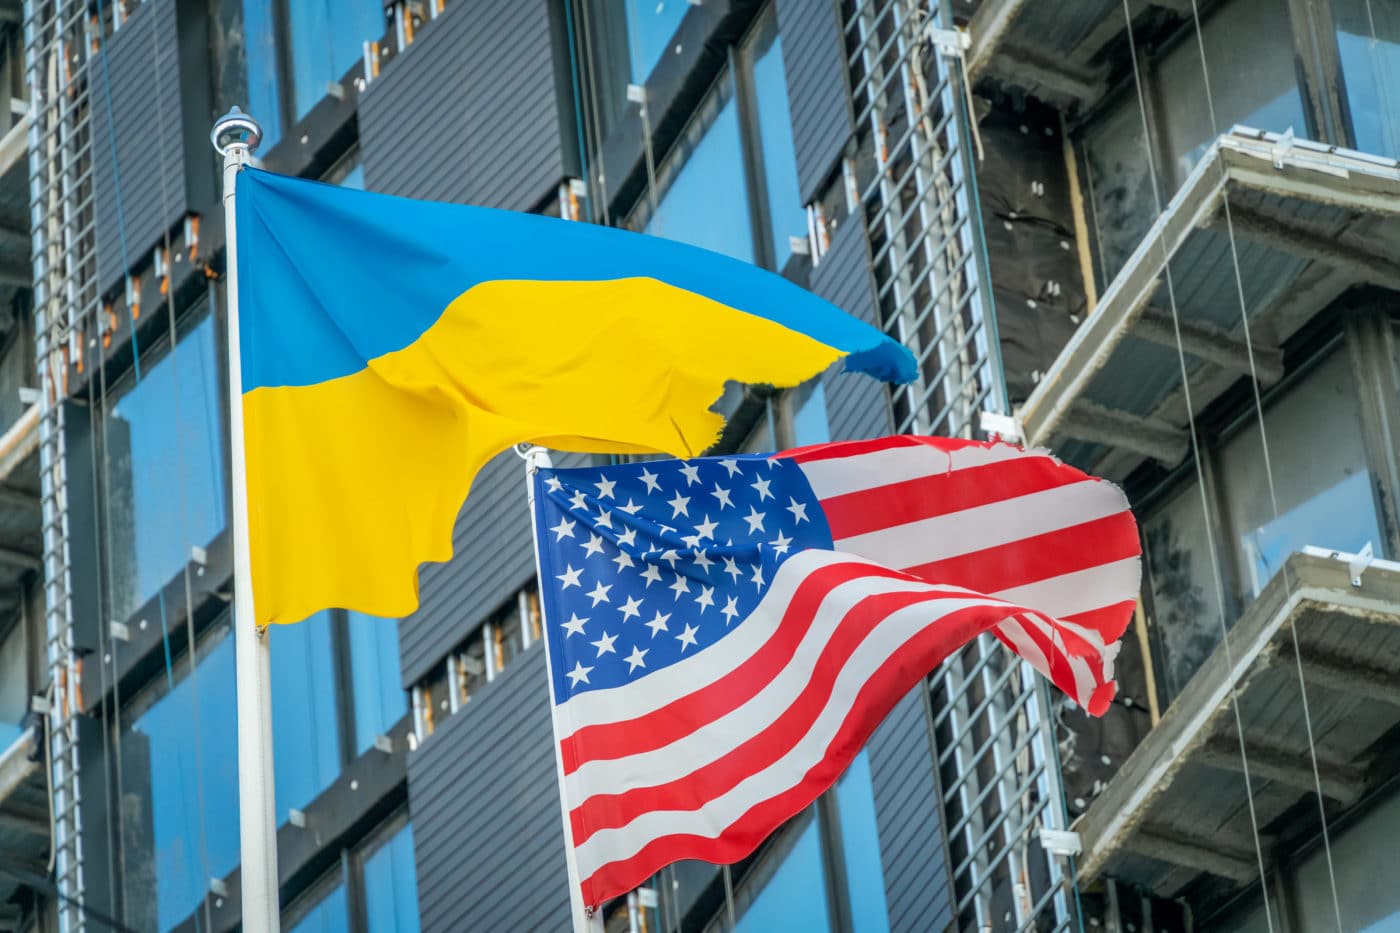 American and Ukrainian flags fly against the blue sky and part of the building. Patriotism.